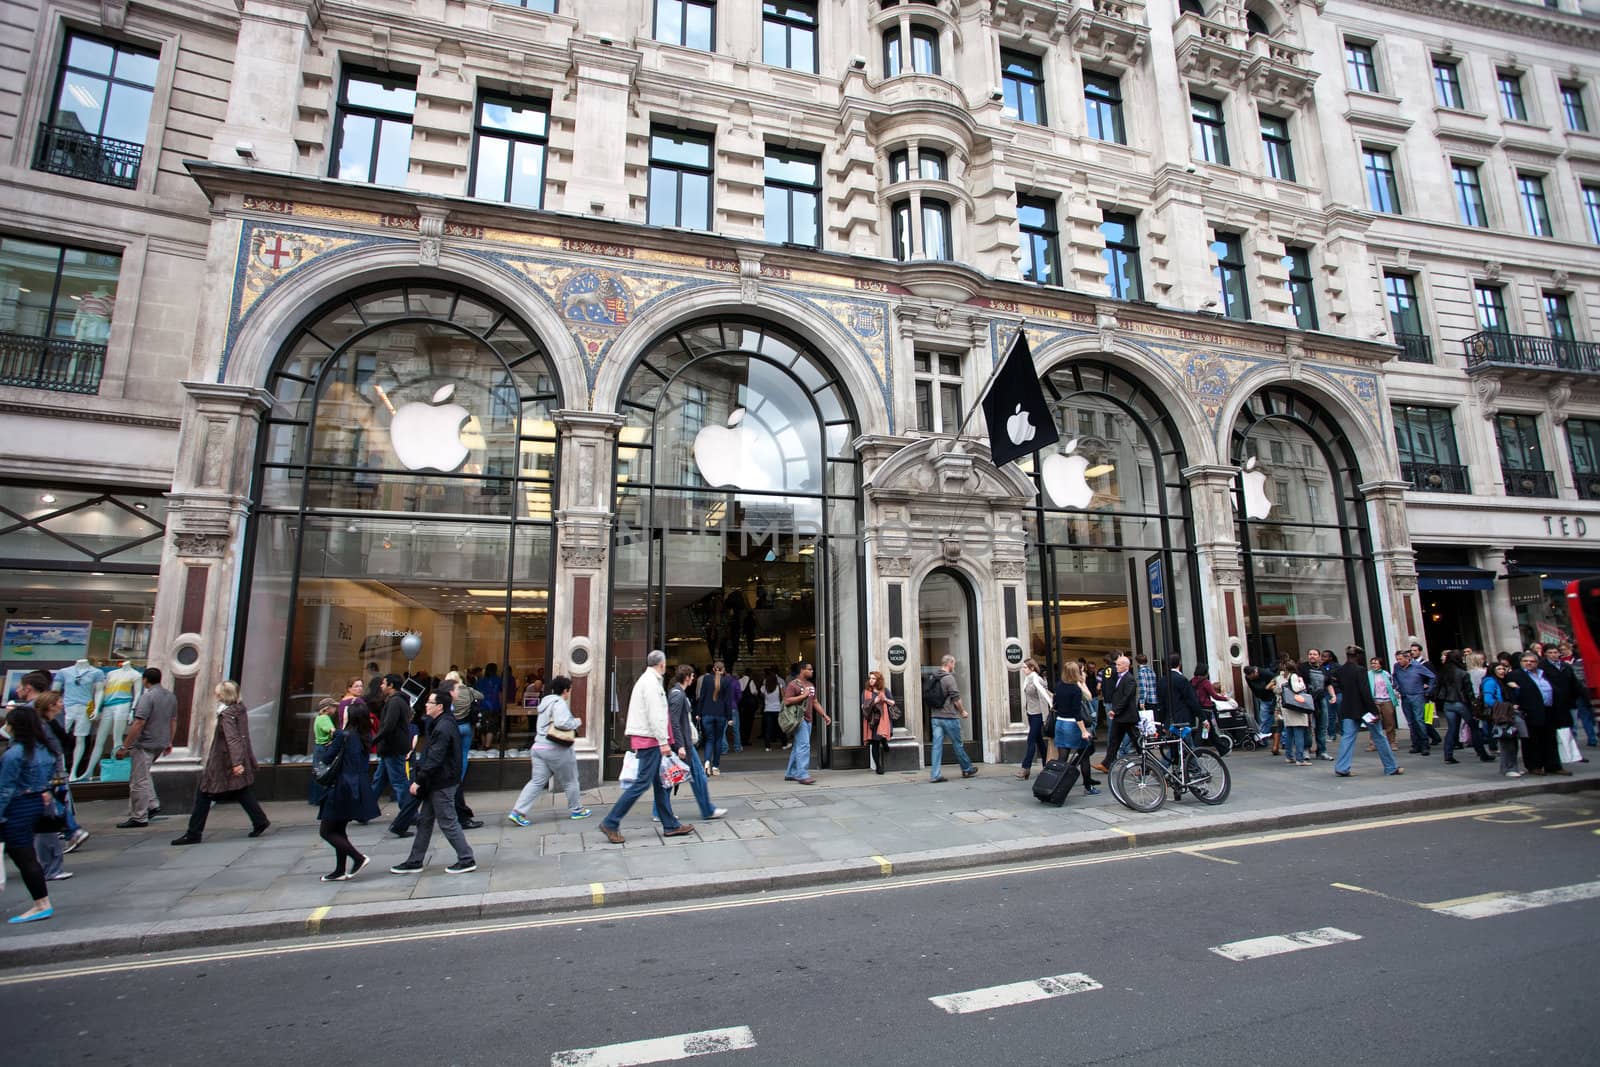 London, United Kingdom - June 13, 2011: People near Entrance to Apple store in Regent Street central London on June 13, 2011. The Apple Store is a dealing computers and consumer electronics produced by Apple and third parties as well.